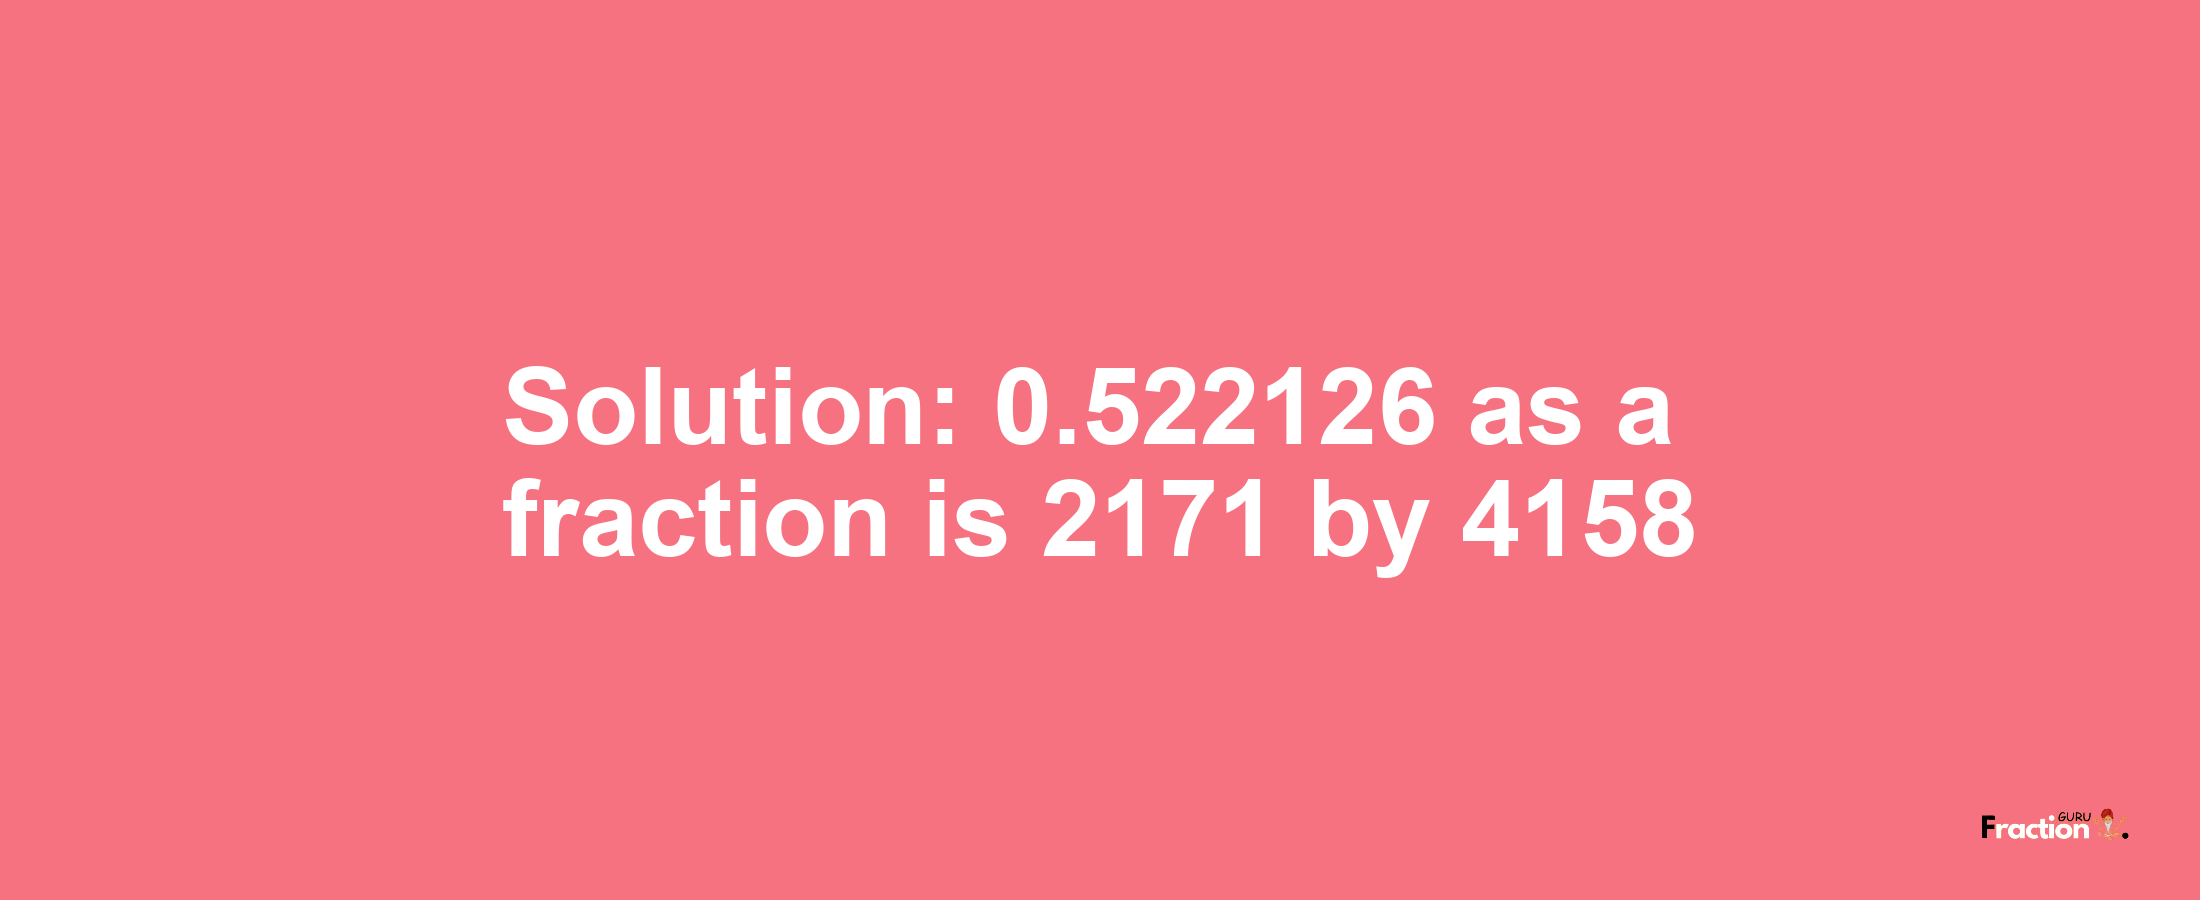 Solution:0.522126 as a fraction is 2171/4158